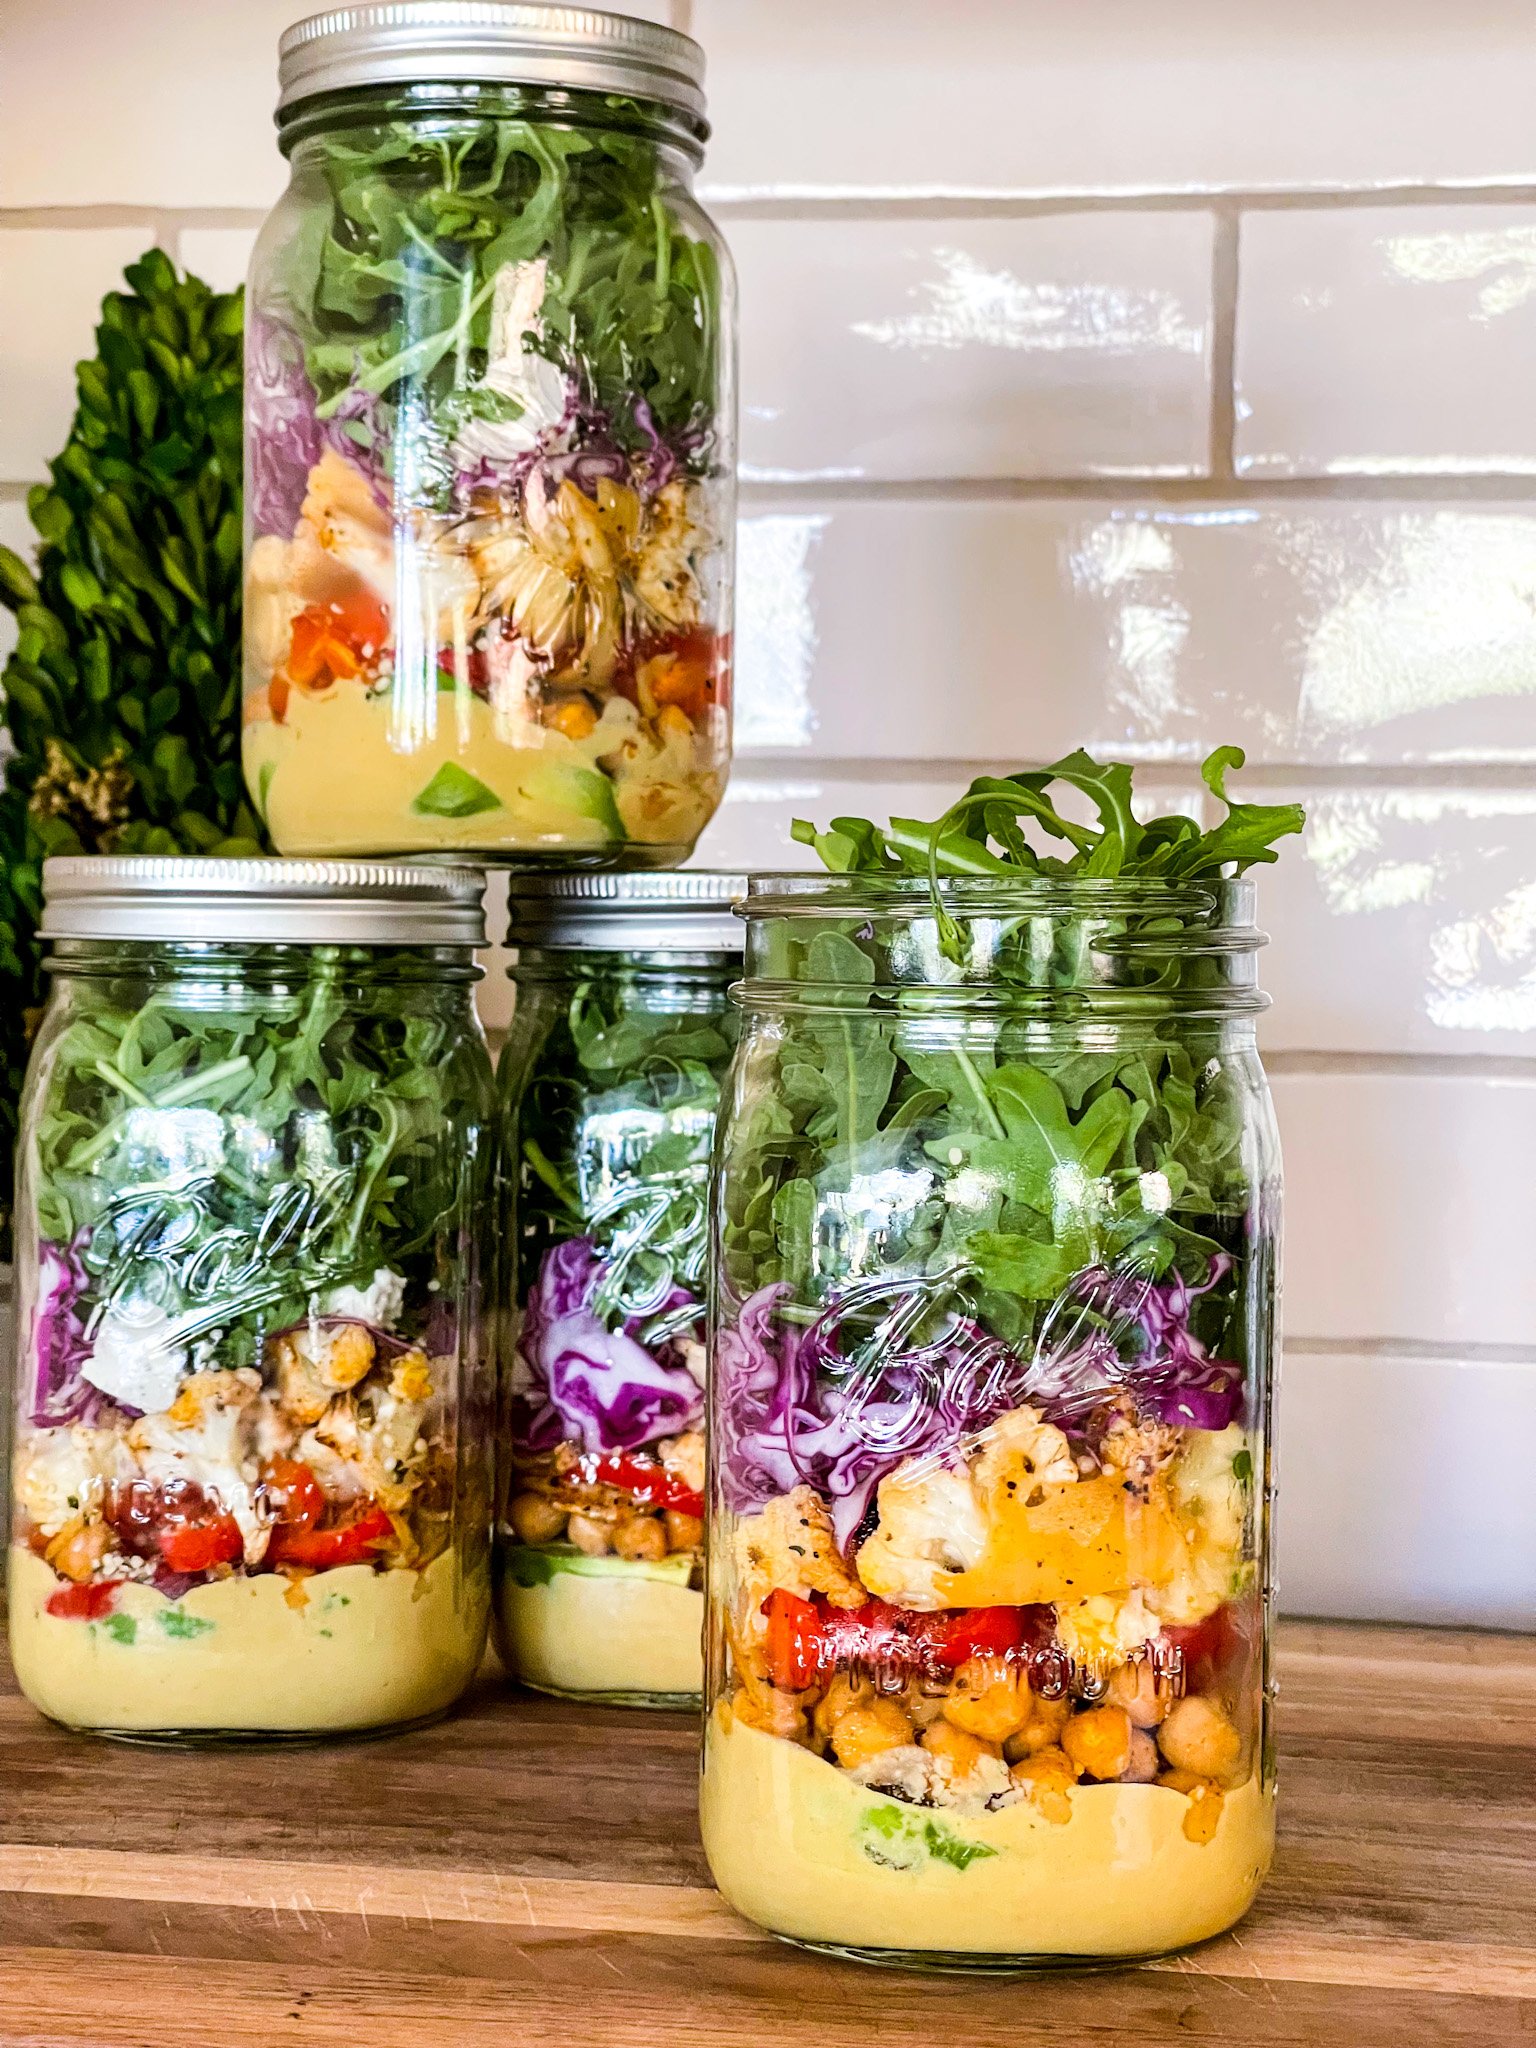 Drizzle a little dressing! Top off your salad with these mason jar